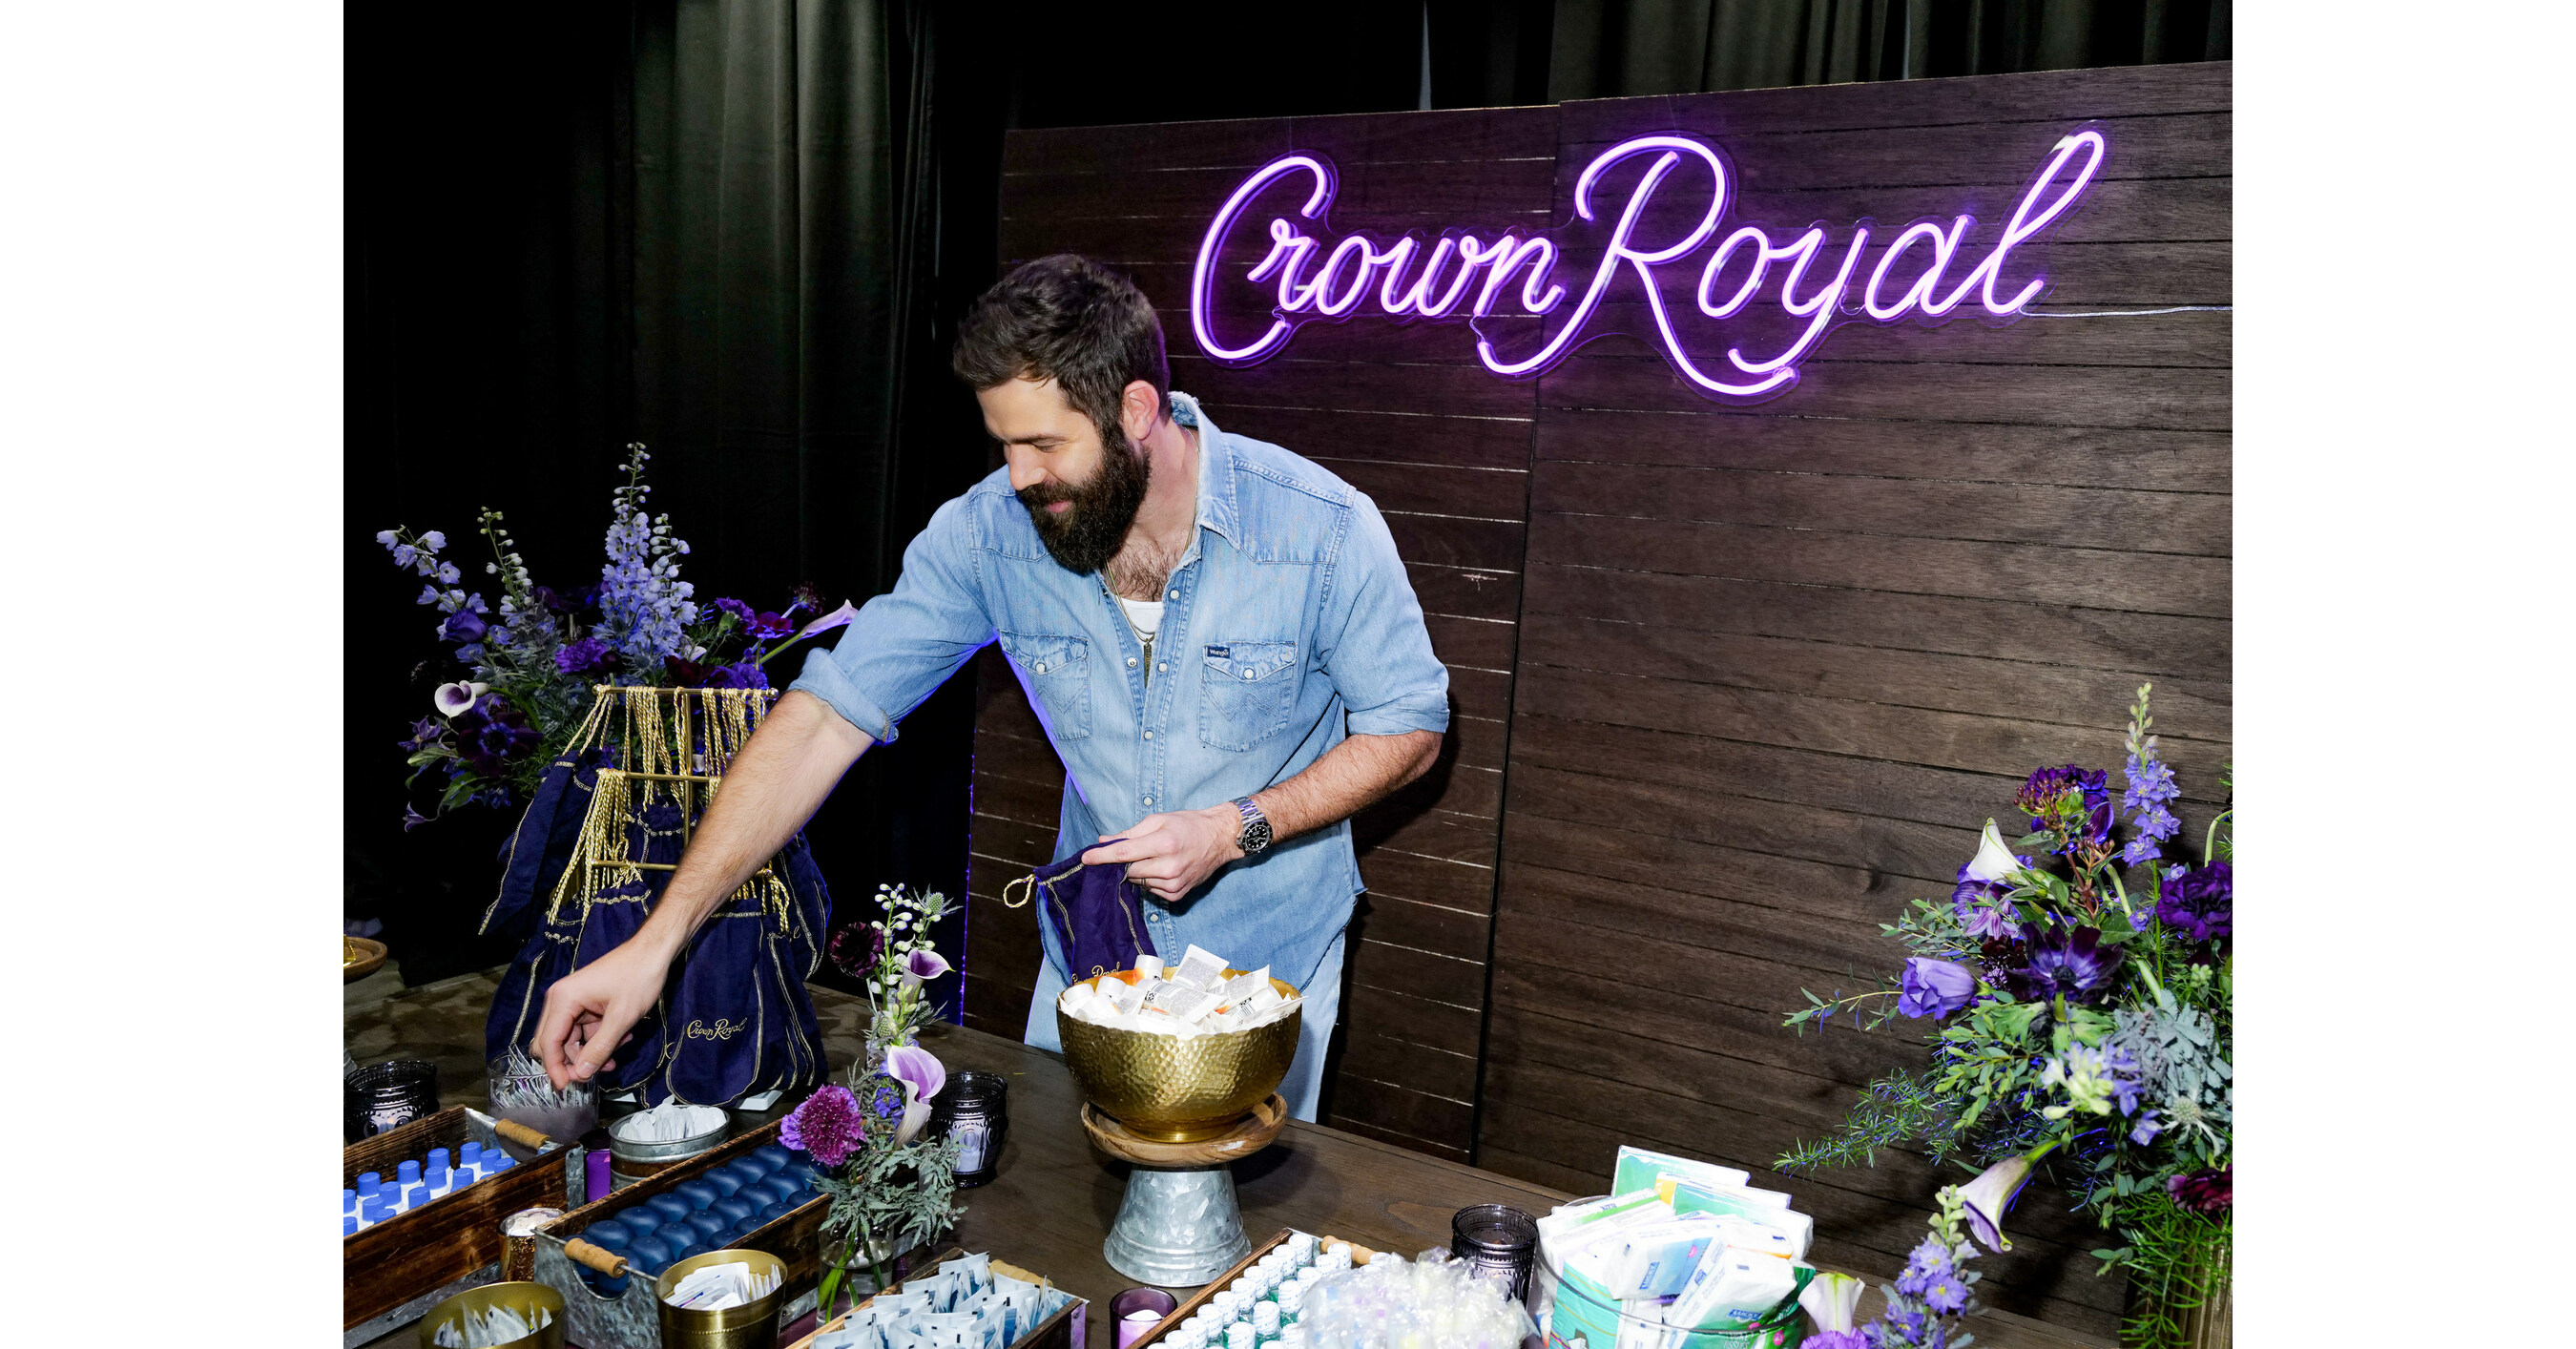 CROWN ROYAL PARTNERS WITH SALESFORCE, CROSSMINT AND VAYNER3 TO